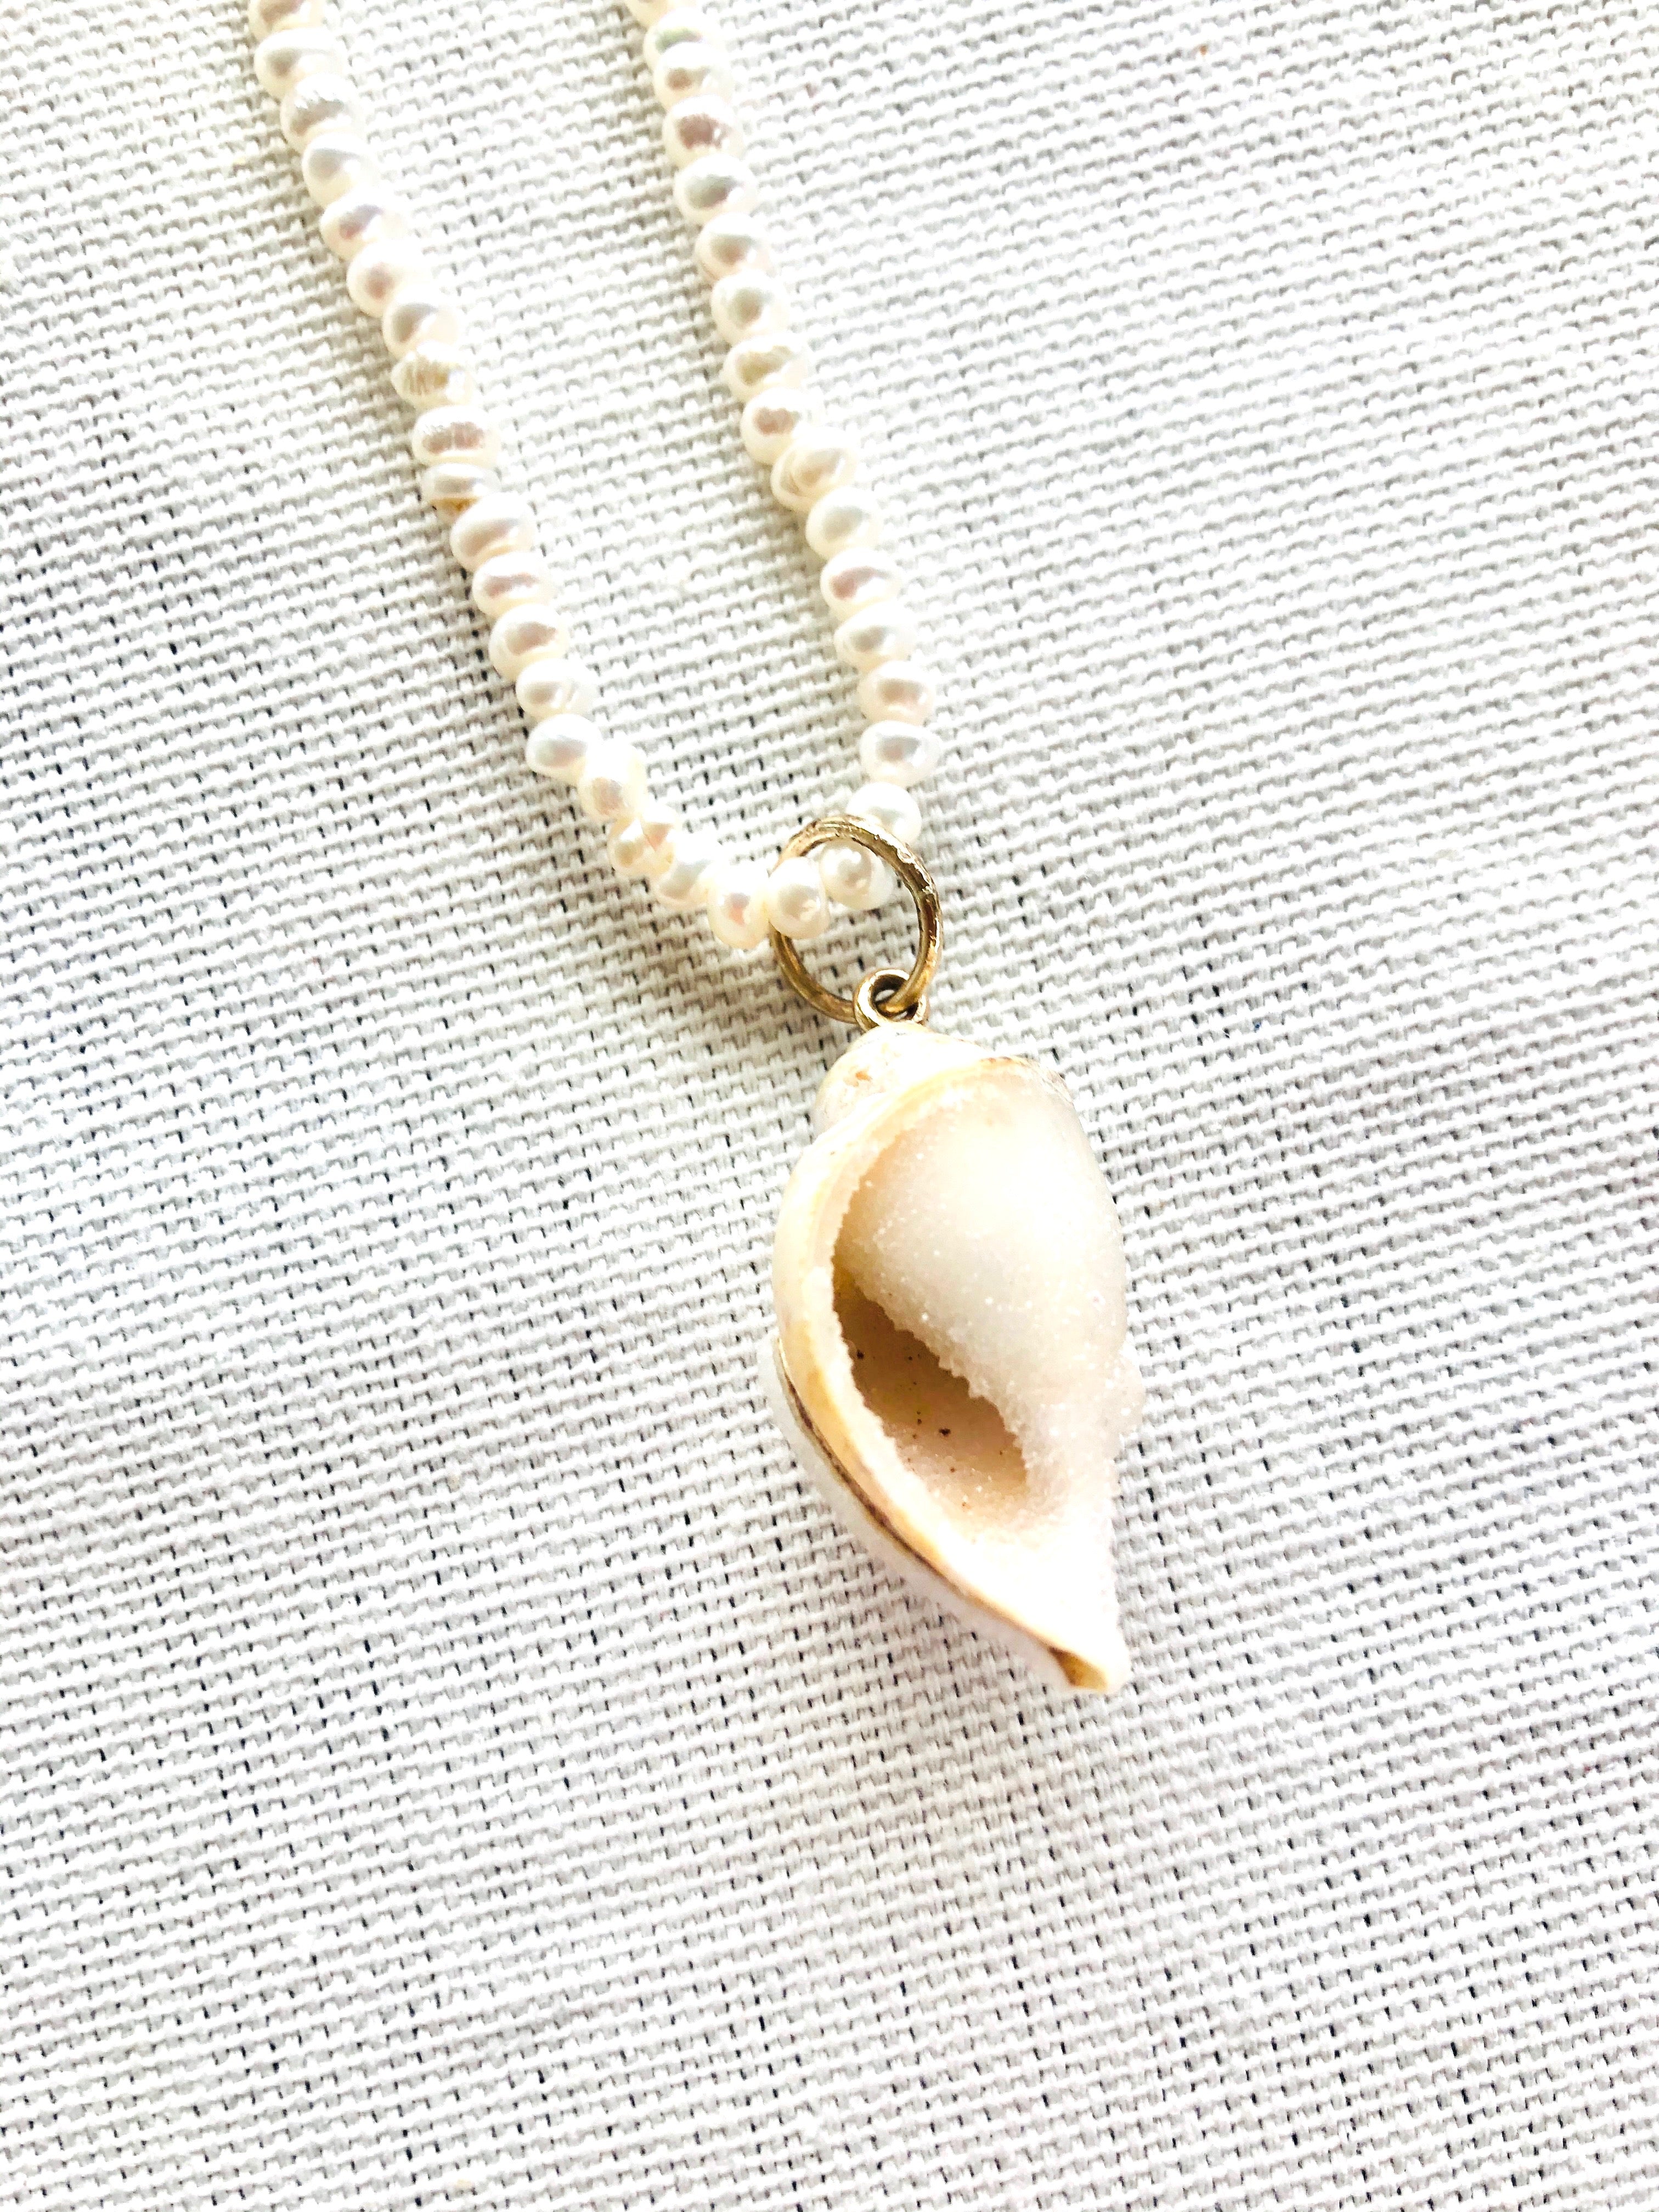 Druzy Fossilized Shell on Seed Pearls